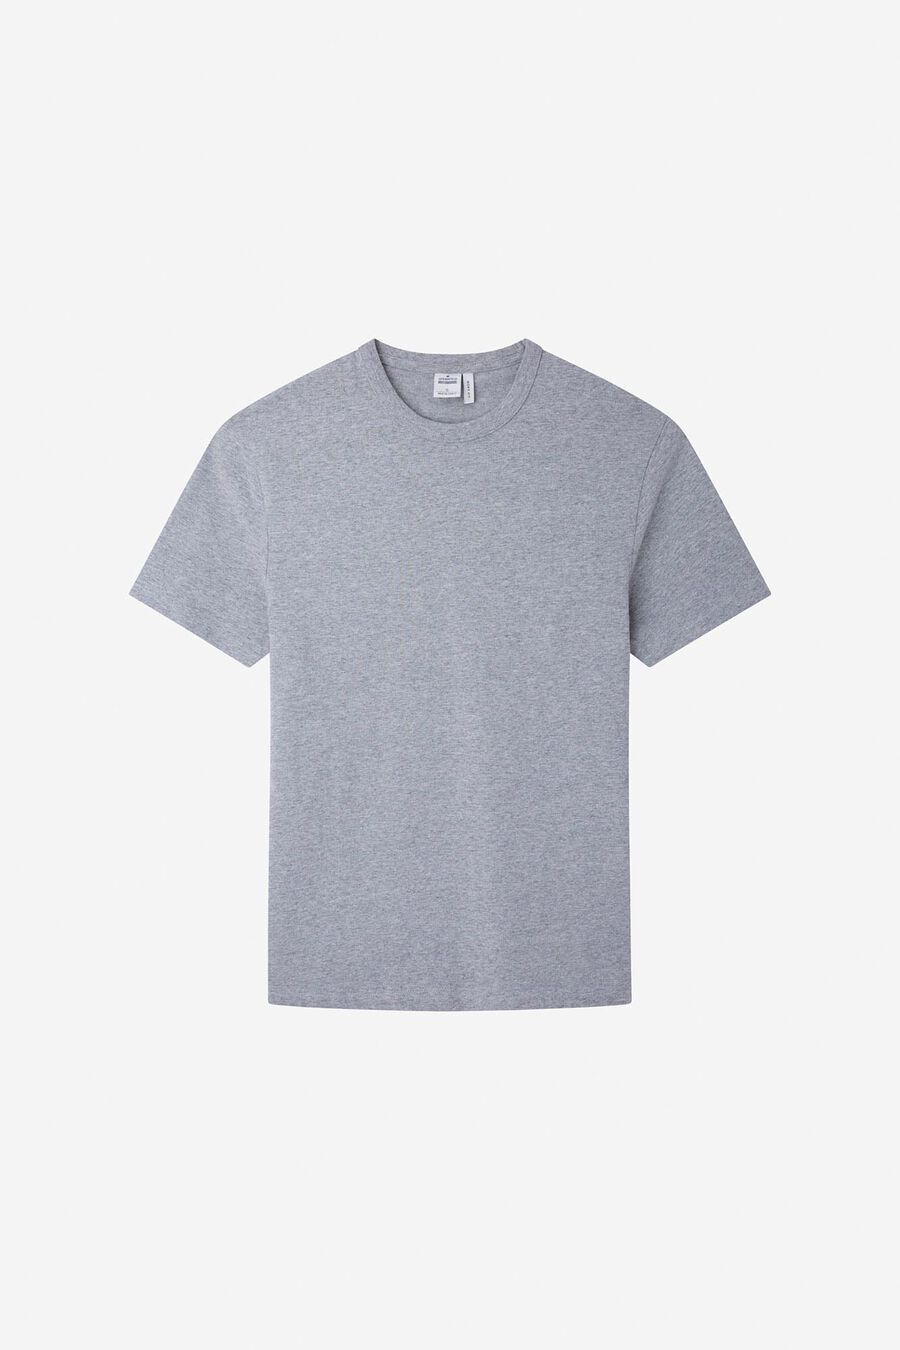 springfield T-shirt boxy open end springfield gris